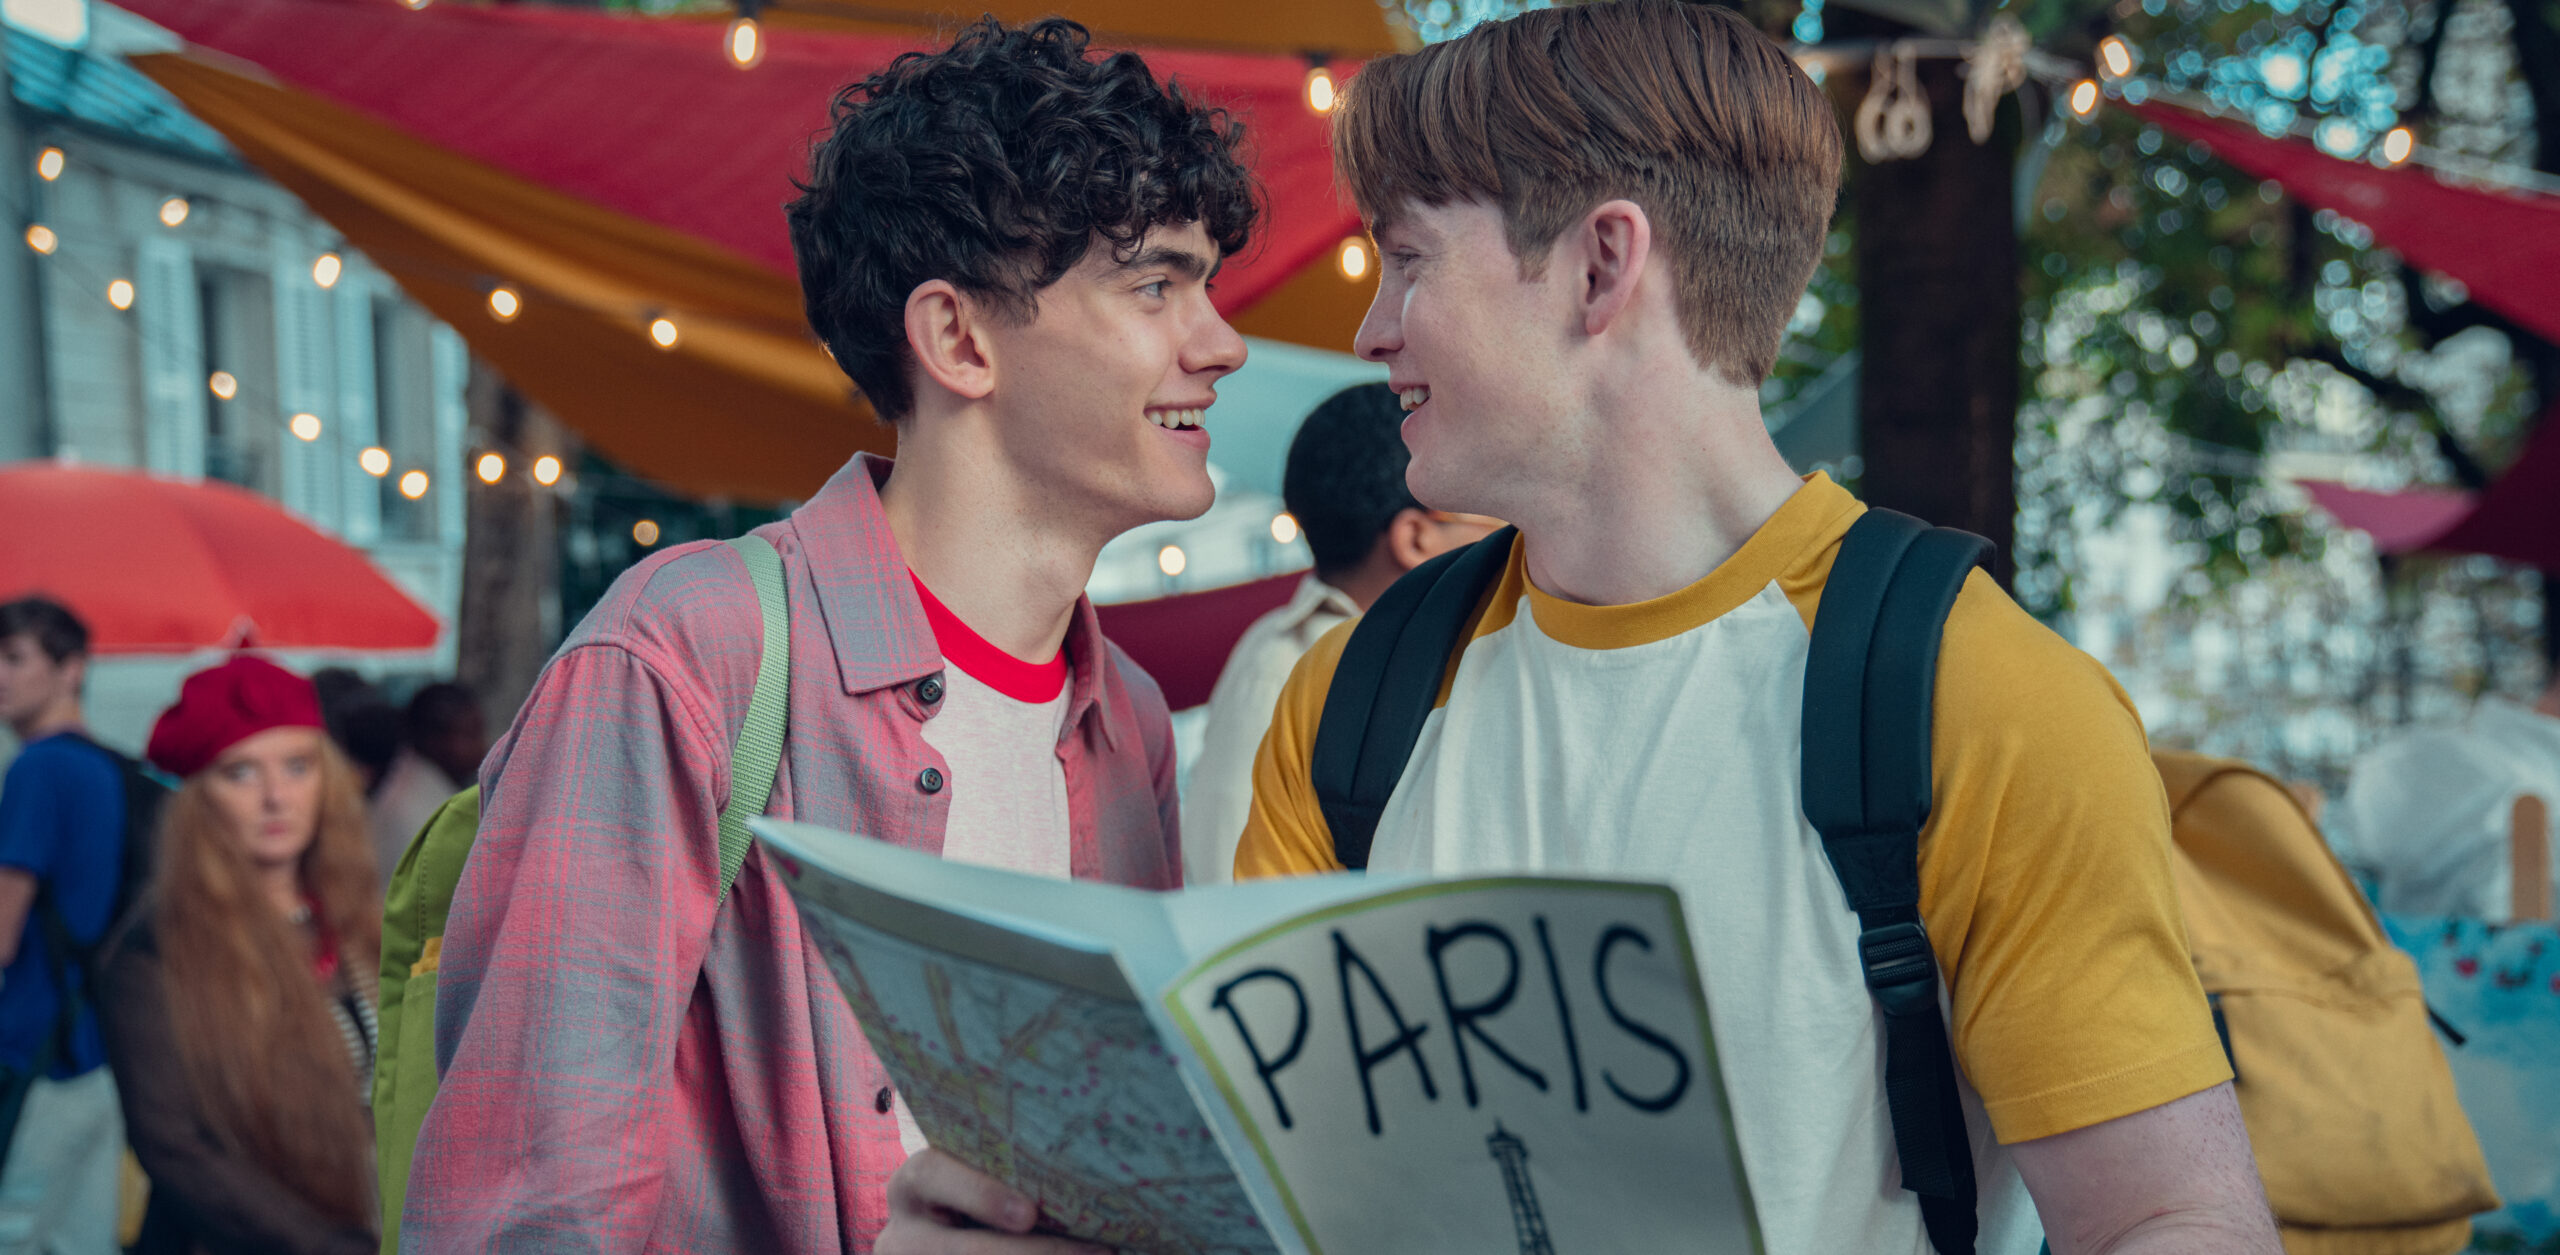 Joe Locke plays Charlie Spring and Kit Conner plays Nick Nelson on the LGBTQ+ Netflix series "Heartstopper." (Photo Credit: Netflix)